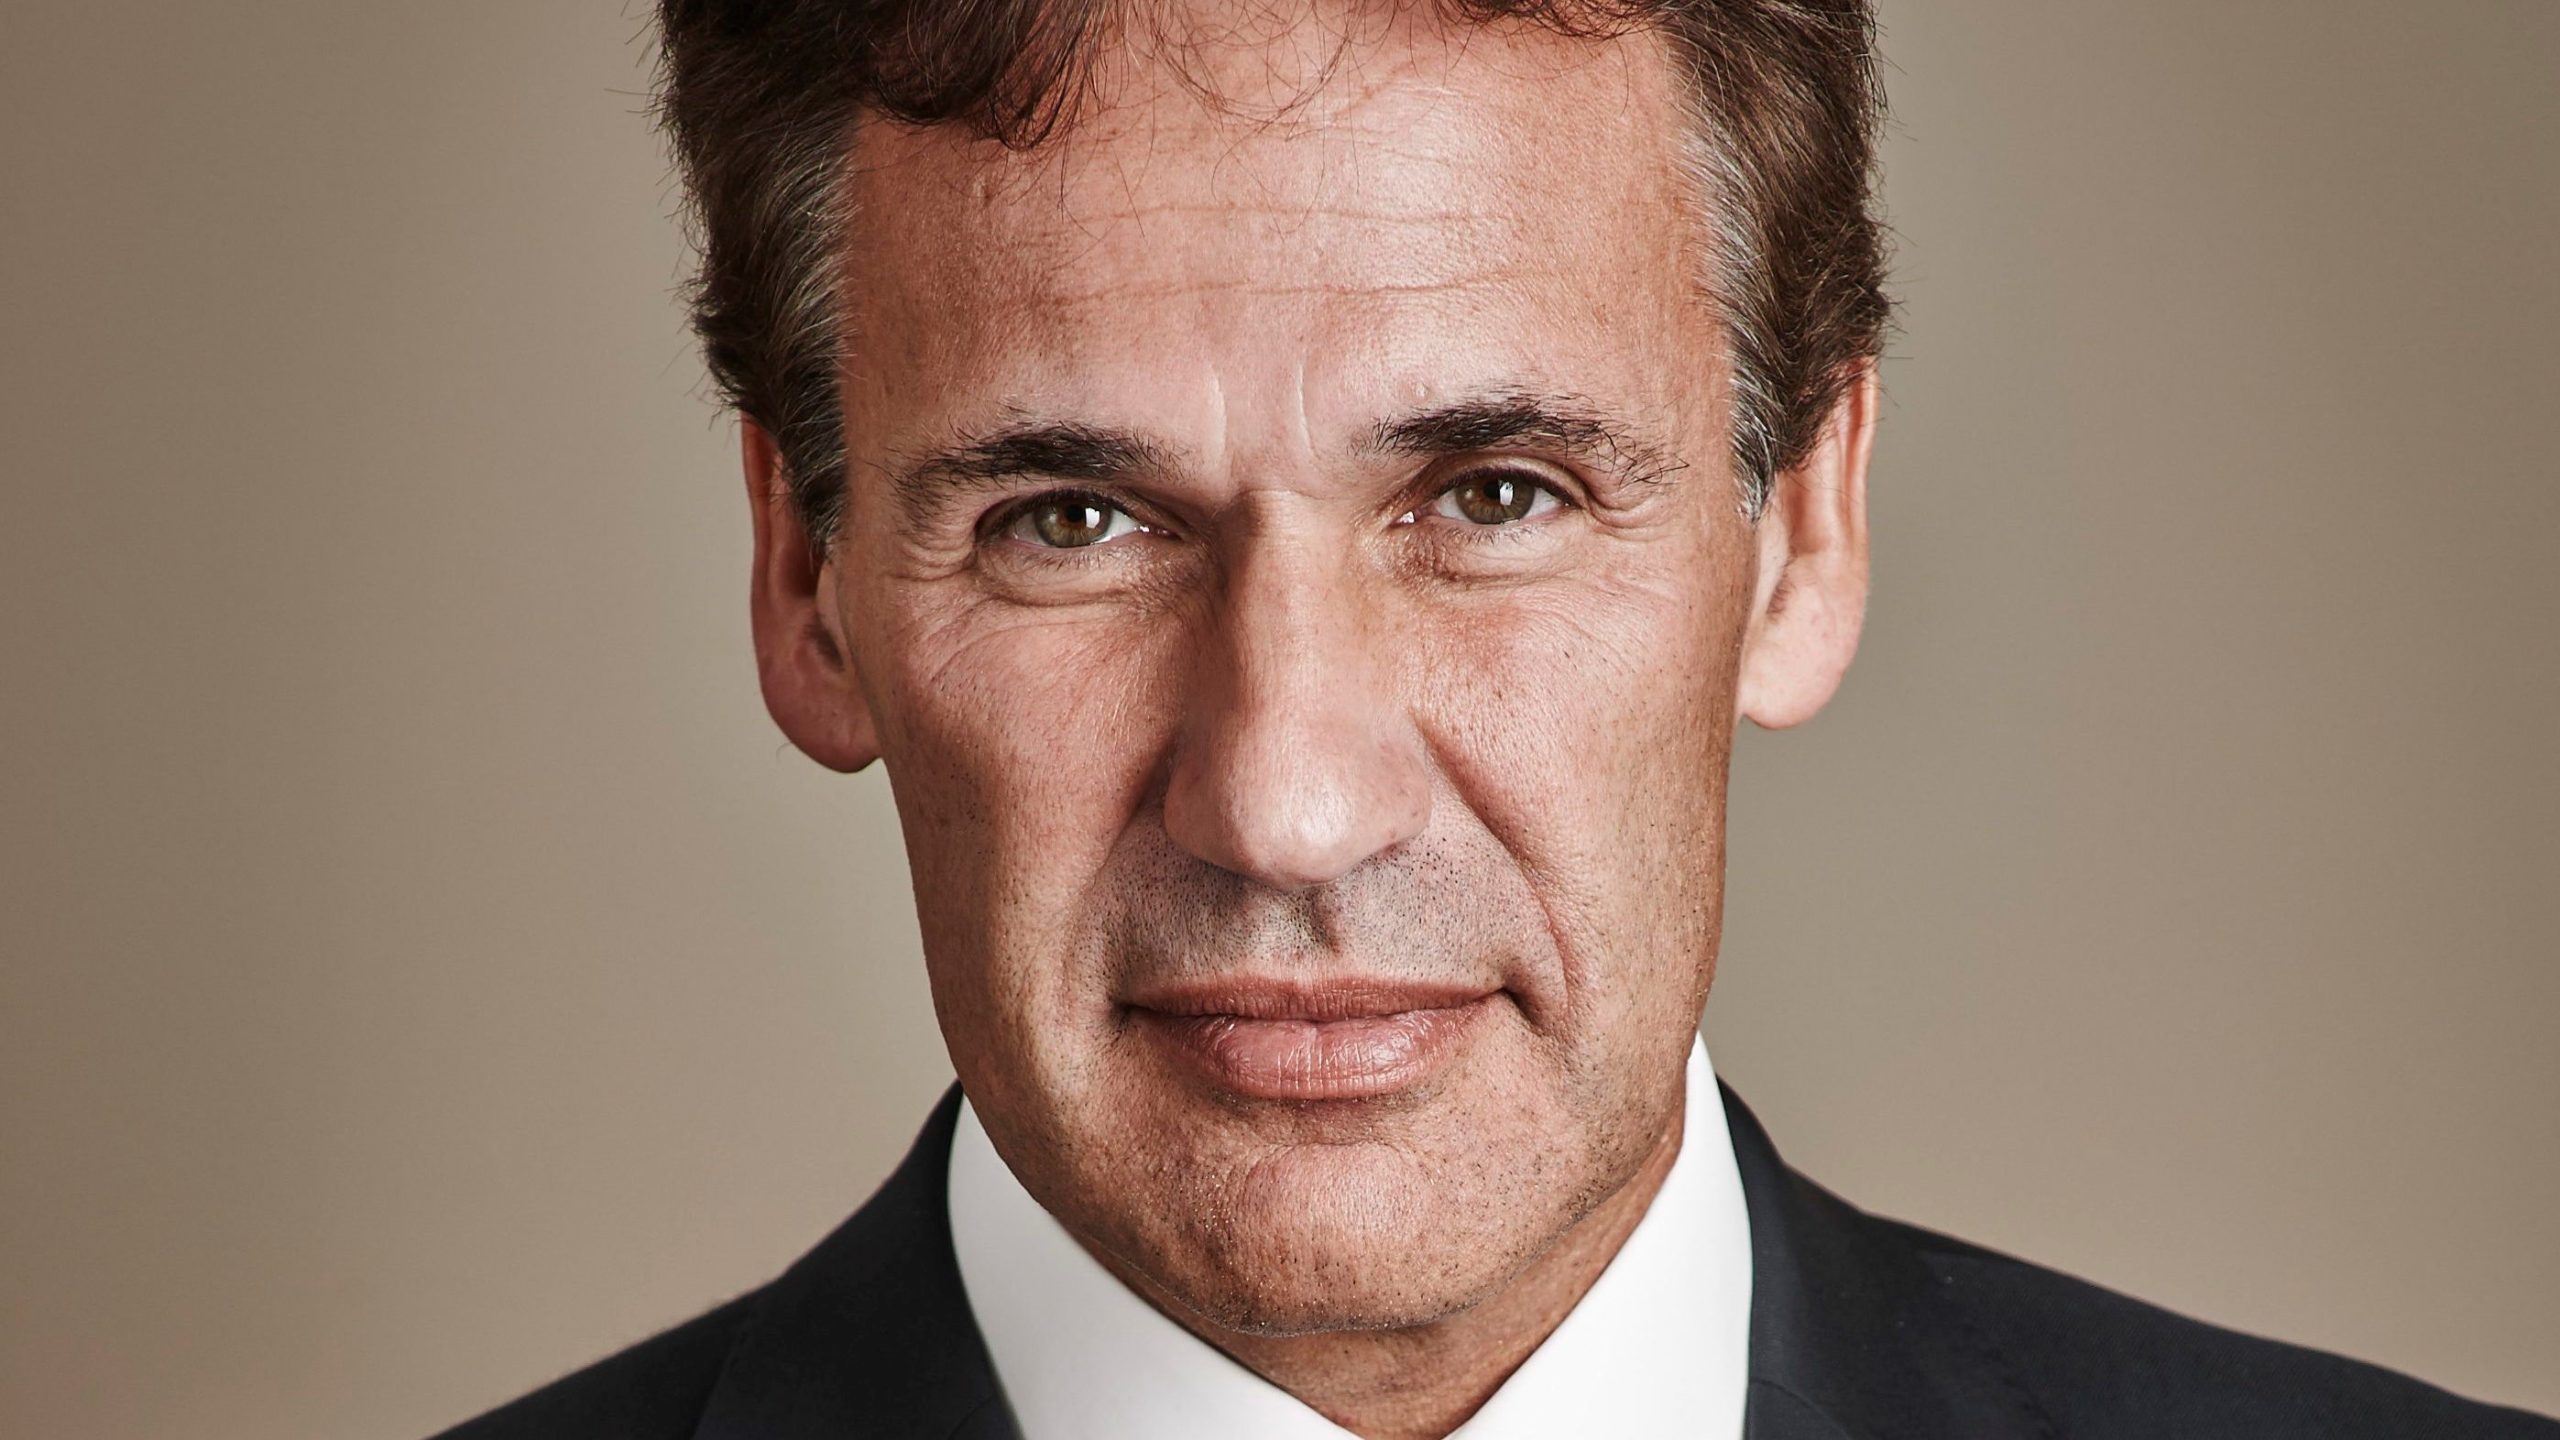 LawNext Episode 71: Legal Futurist Richard Susskind on Coronavirus, Courts and the Legal Profession